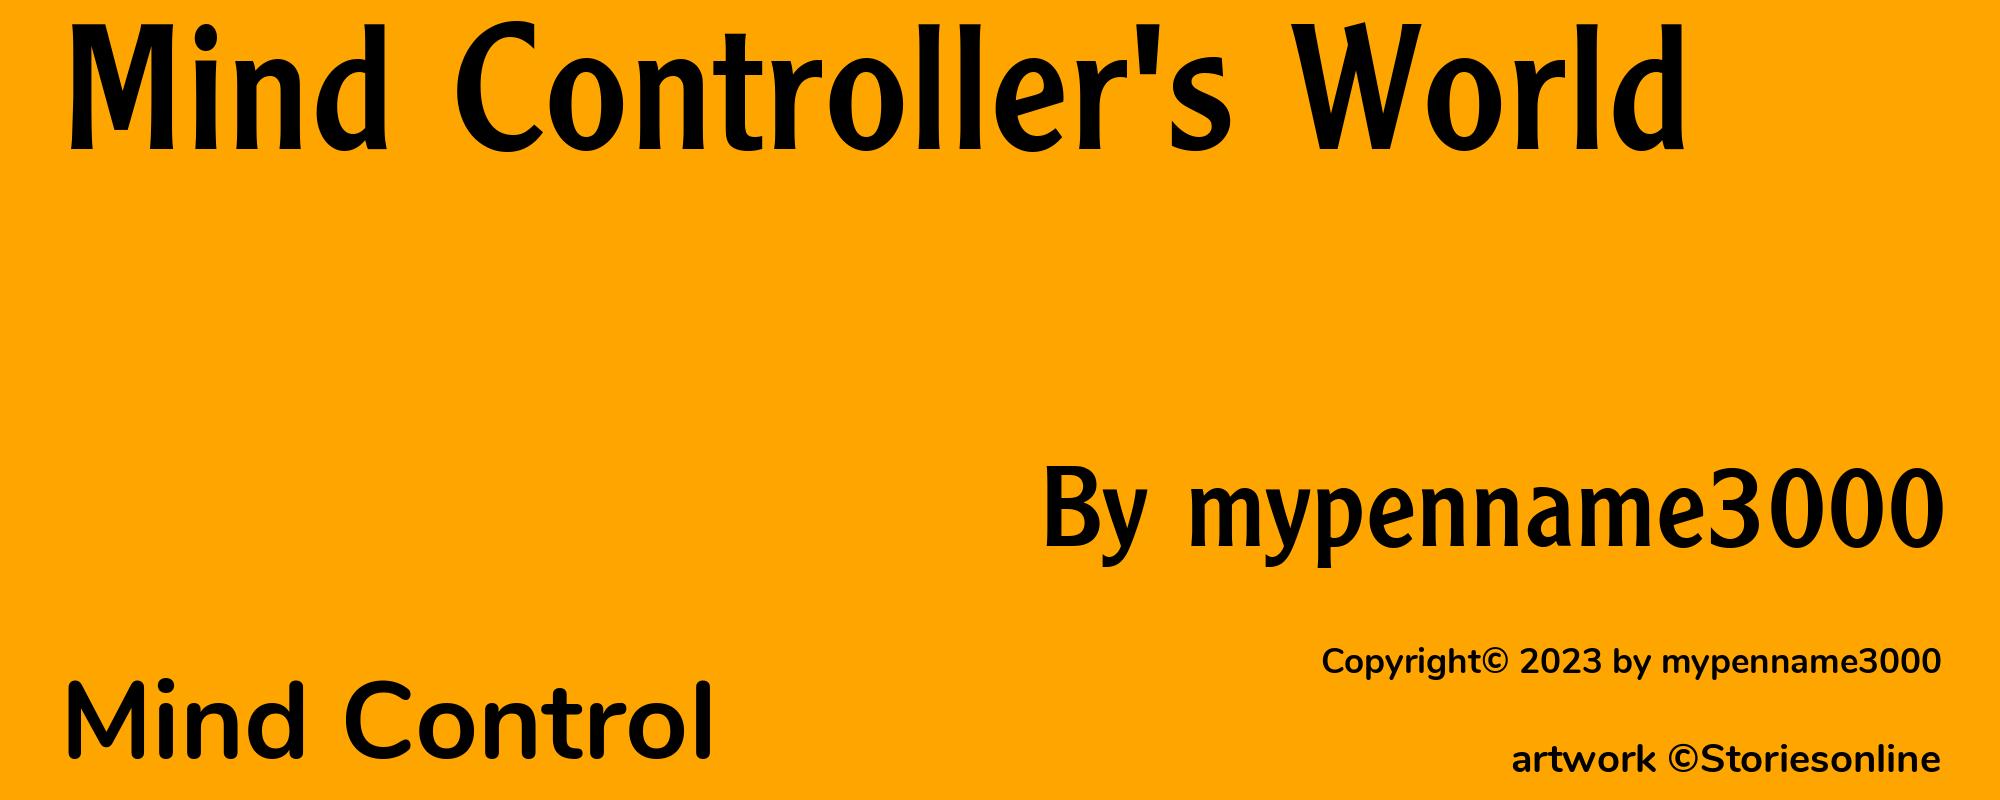 Mind Controller's World - Cover